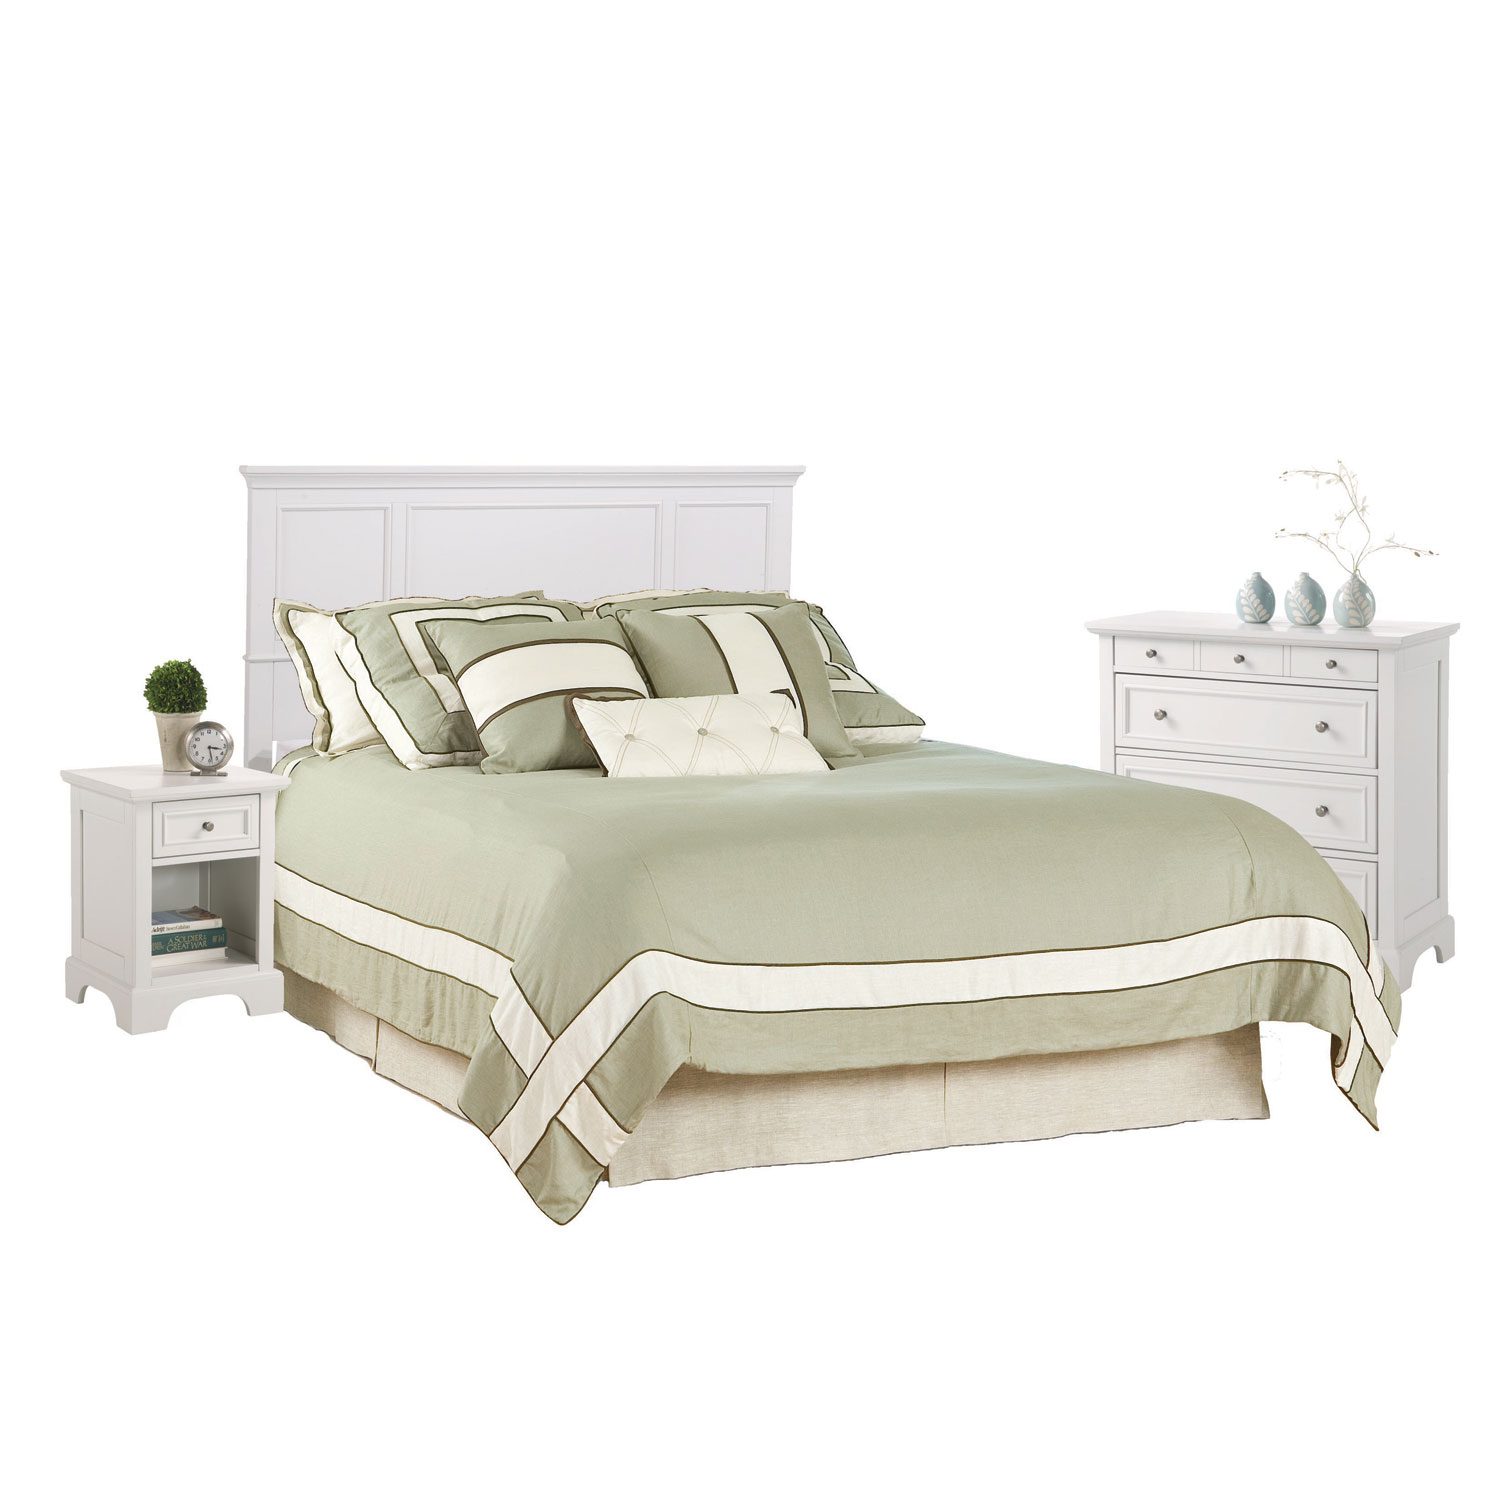 white bedroom furniture sets queen photo - 7